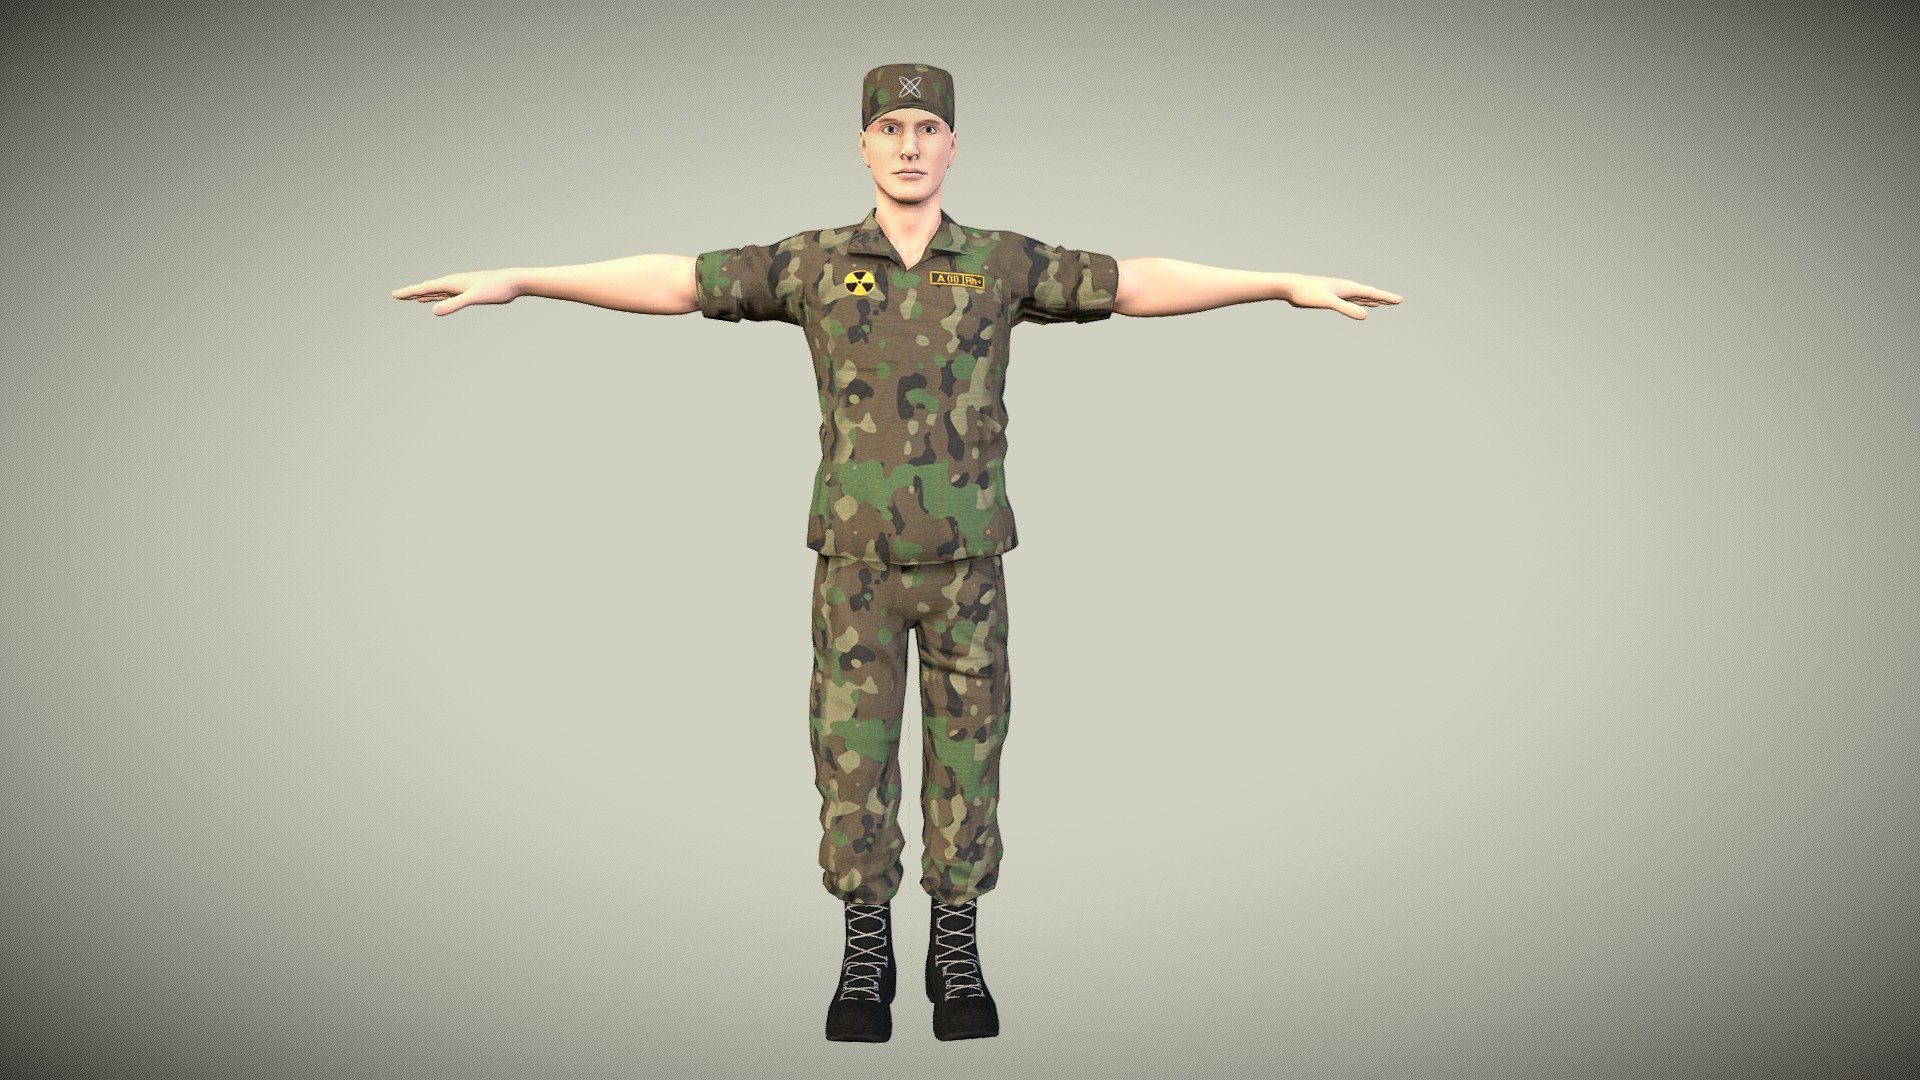 Soldier. 2K Unity textures. For the game Quantum Number from Karabas Studio. https://quantumnumber.net/ - Soldier - 3D model by Karabas Studio (@Alexei777) 3d model